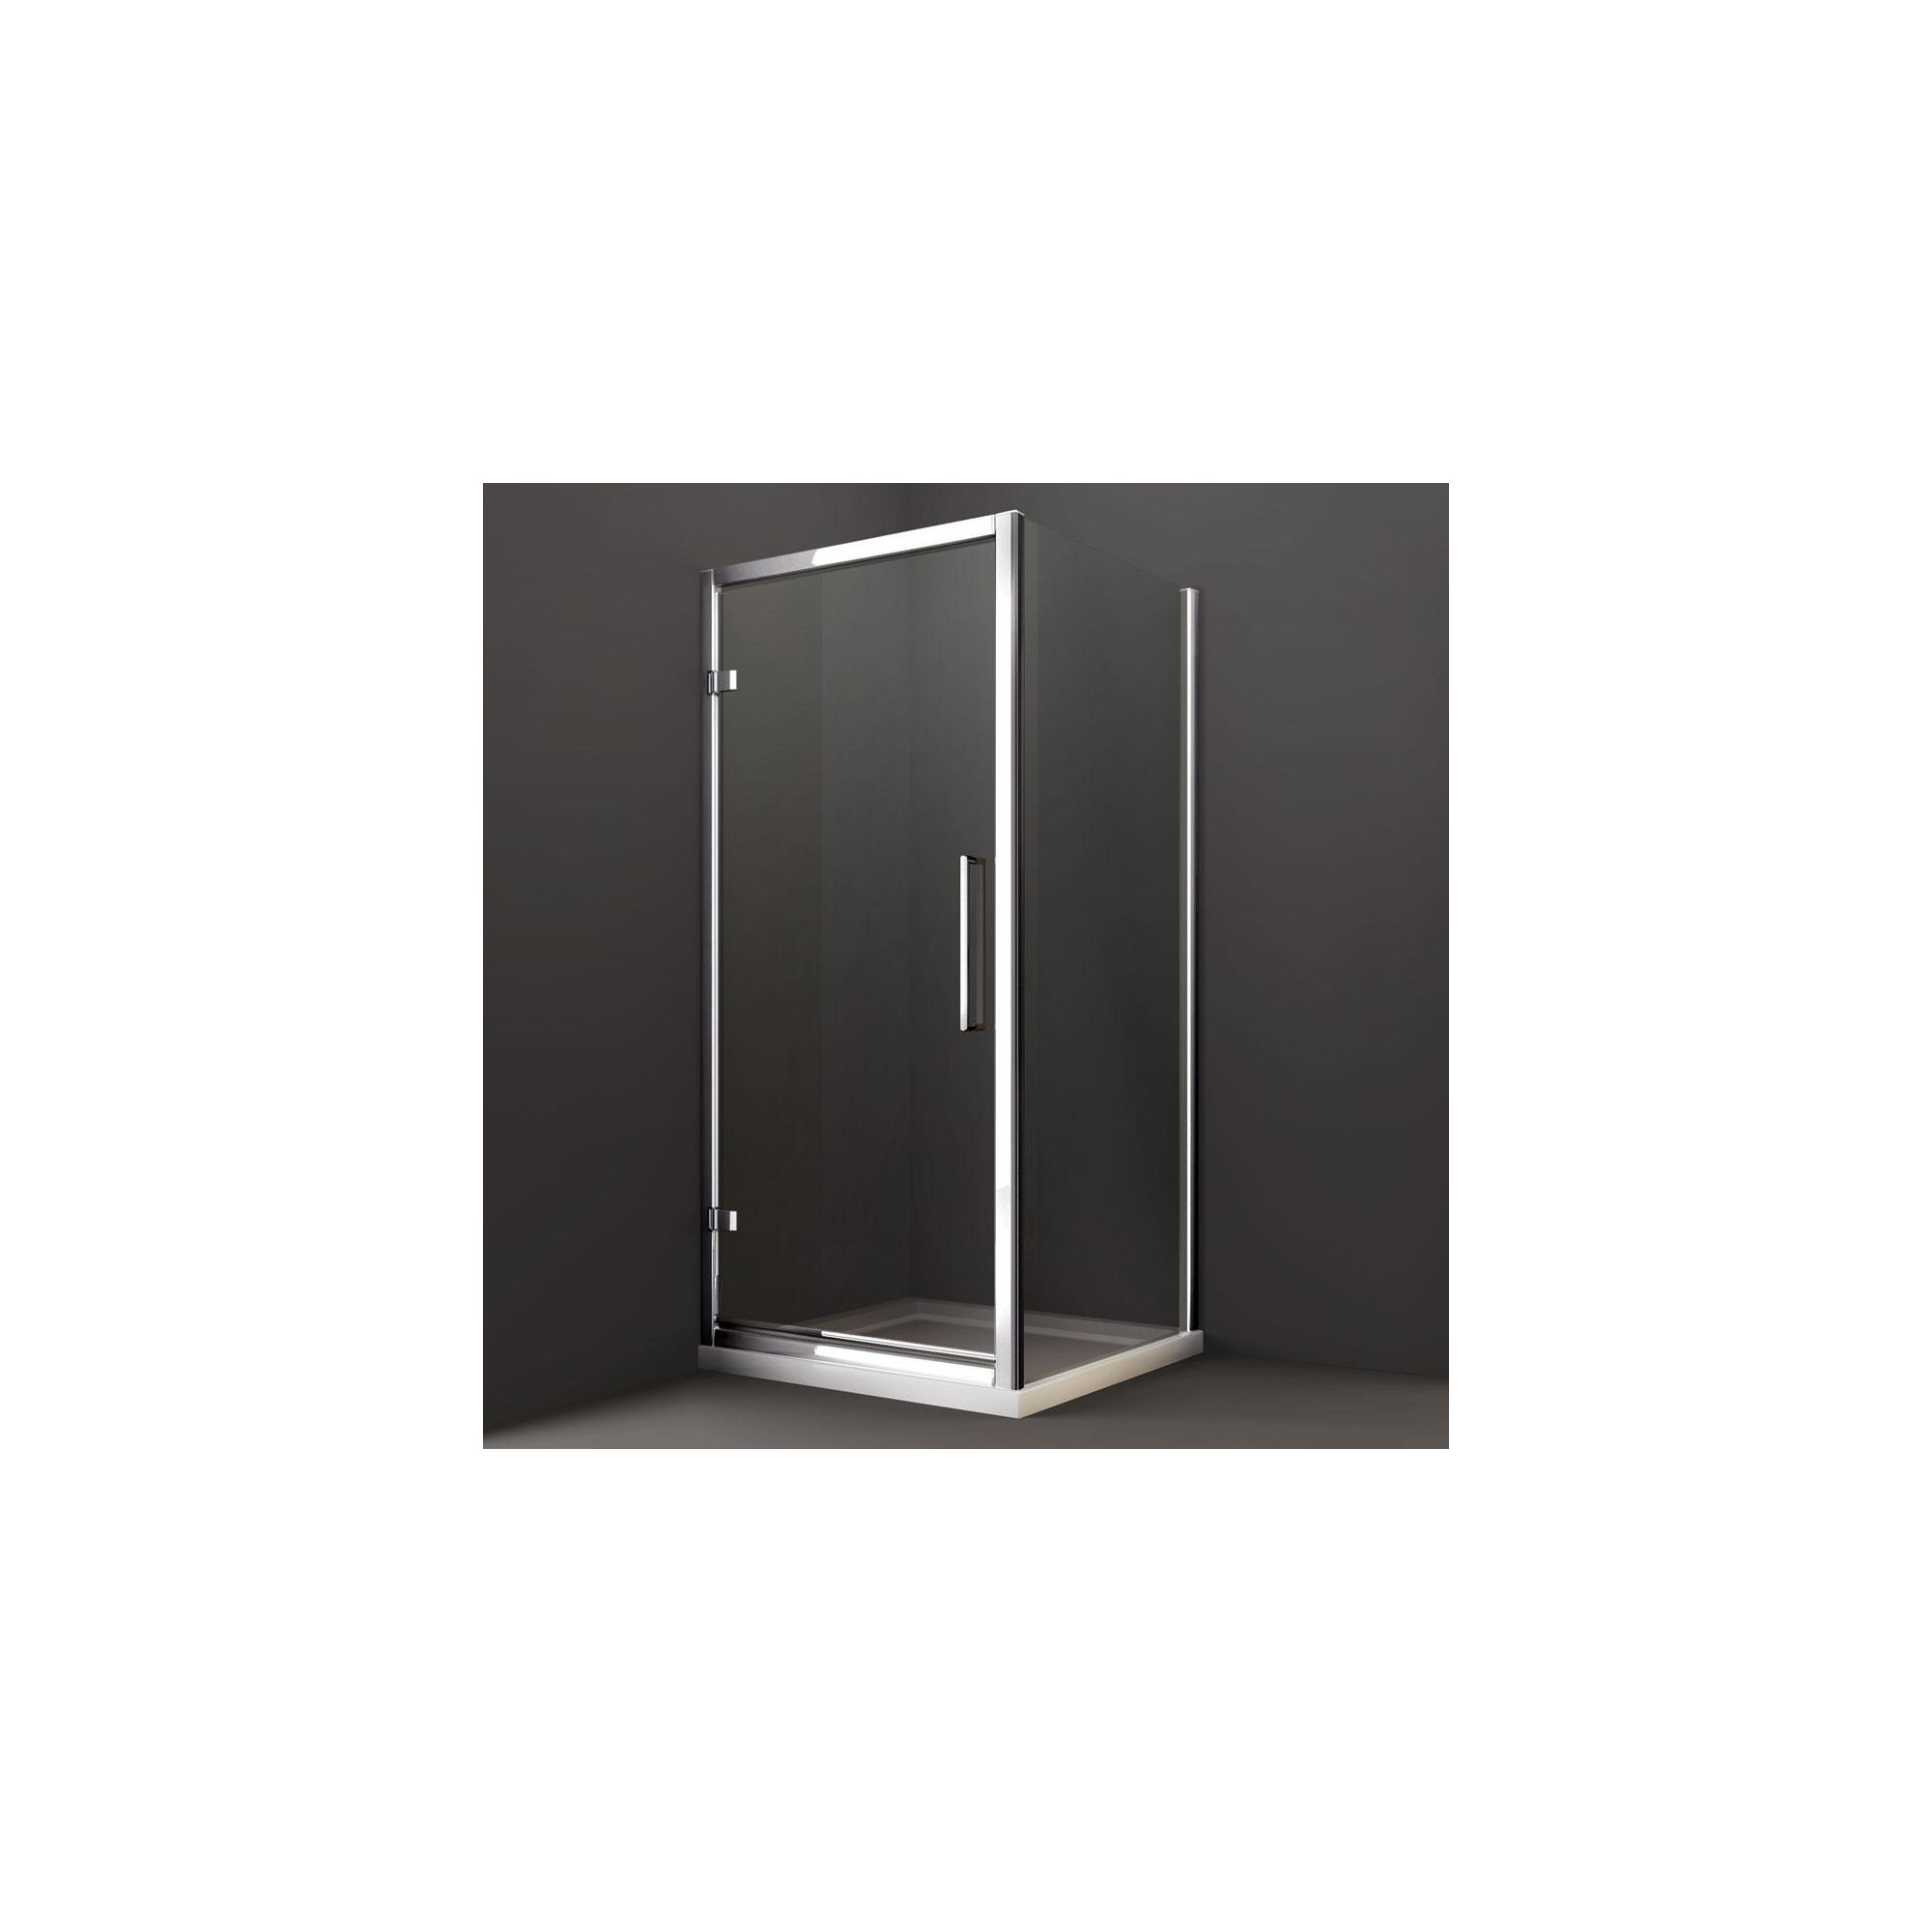 Merlyn Series 8 Hinged Shower Door, 900mm Wide, Chrome Frame, 8mm Glass at Tesco Direct